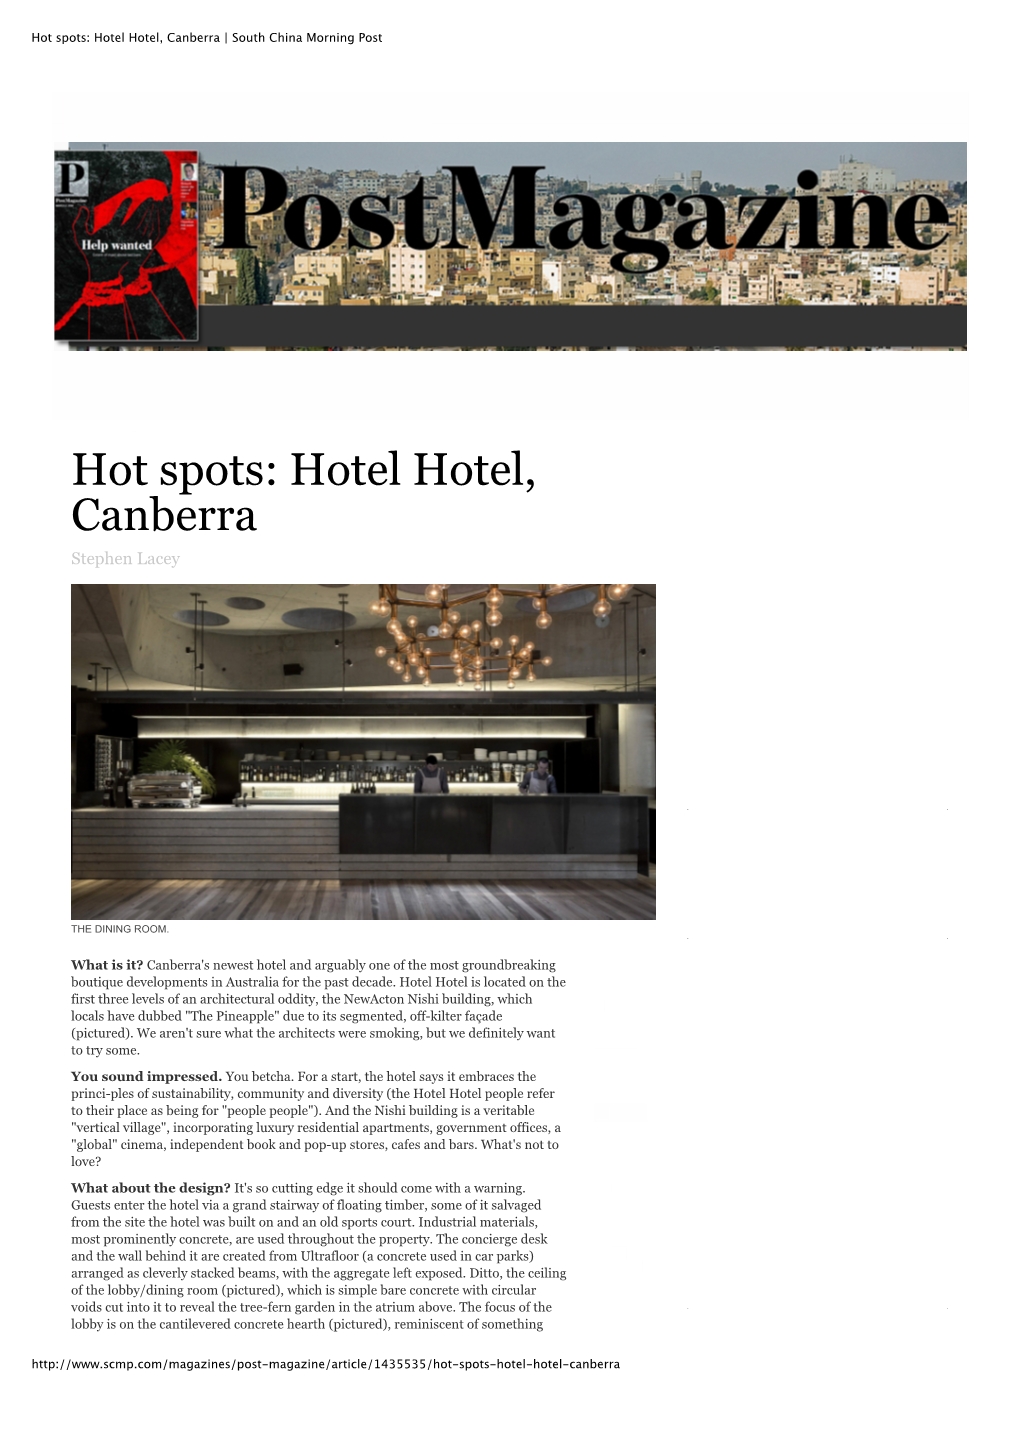 Hot Spots: Hotel Hotel, Canberra | South China Morning Post